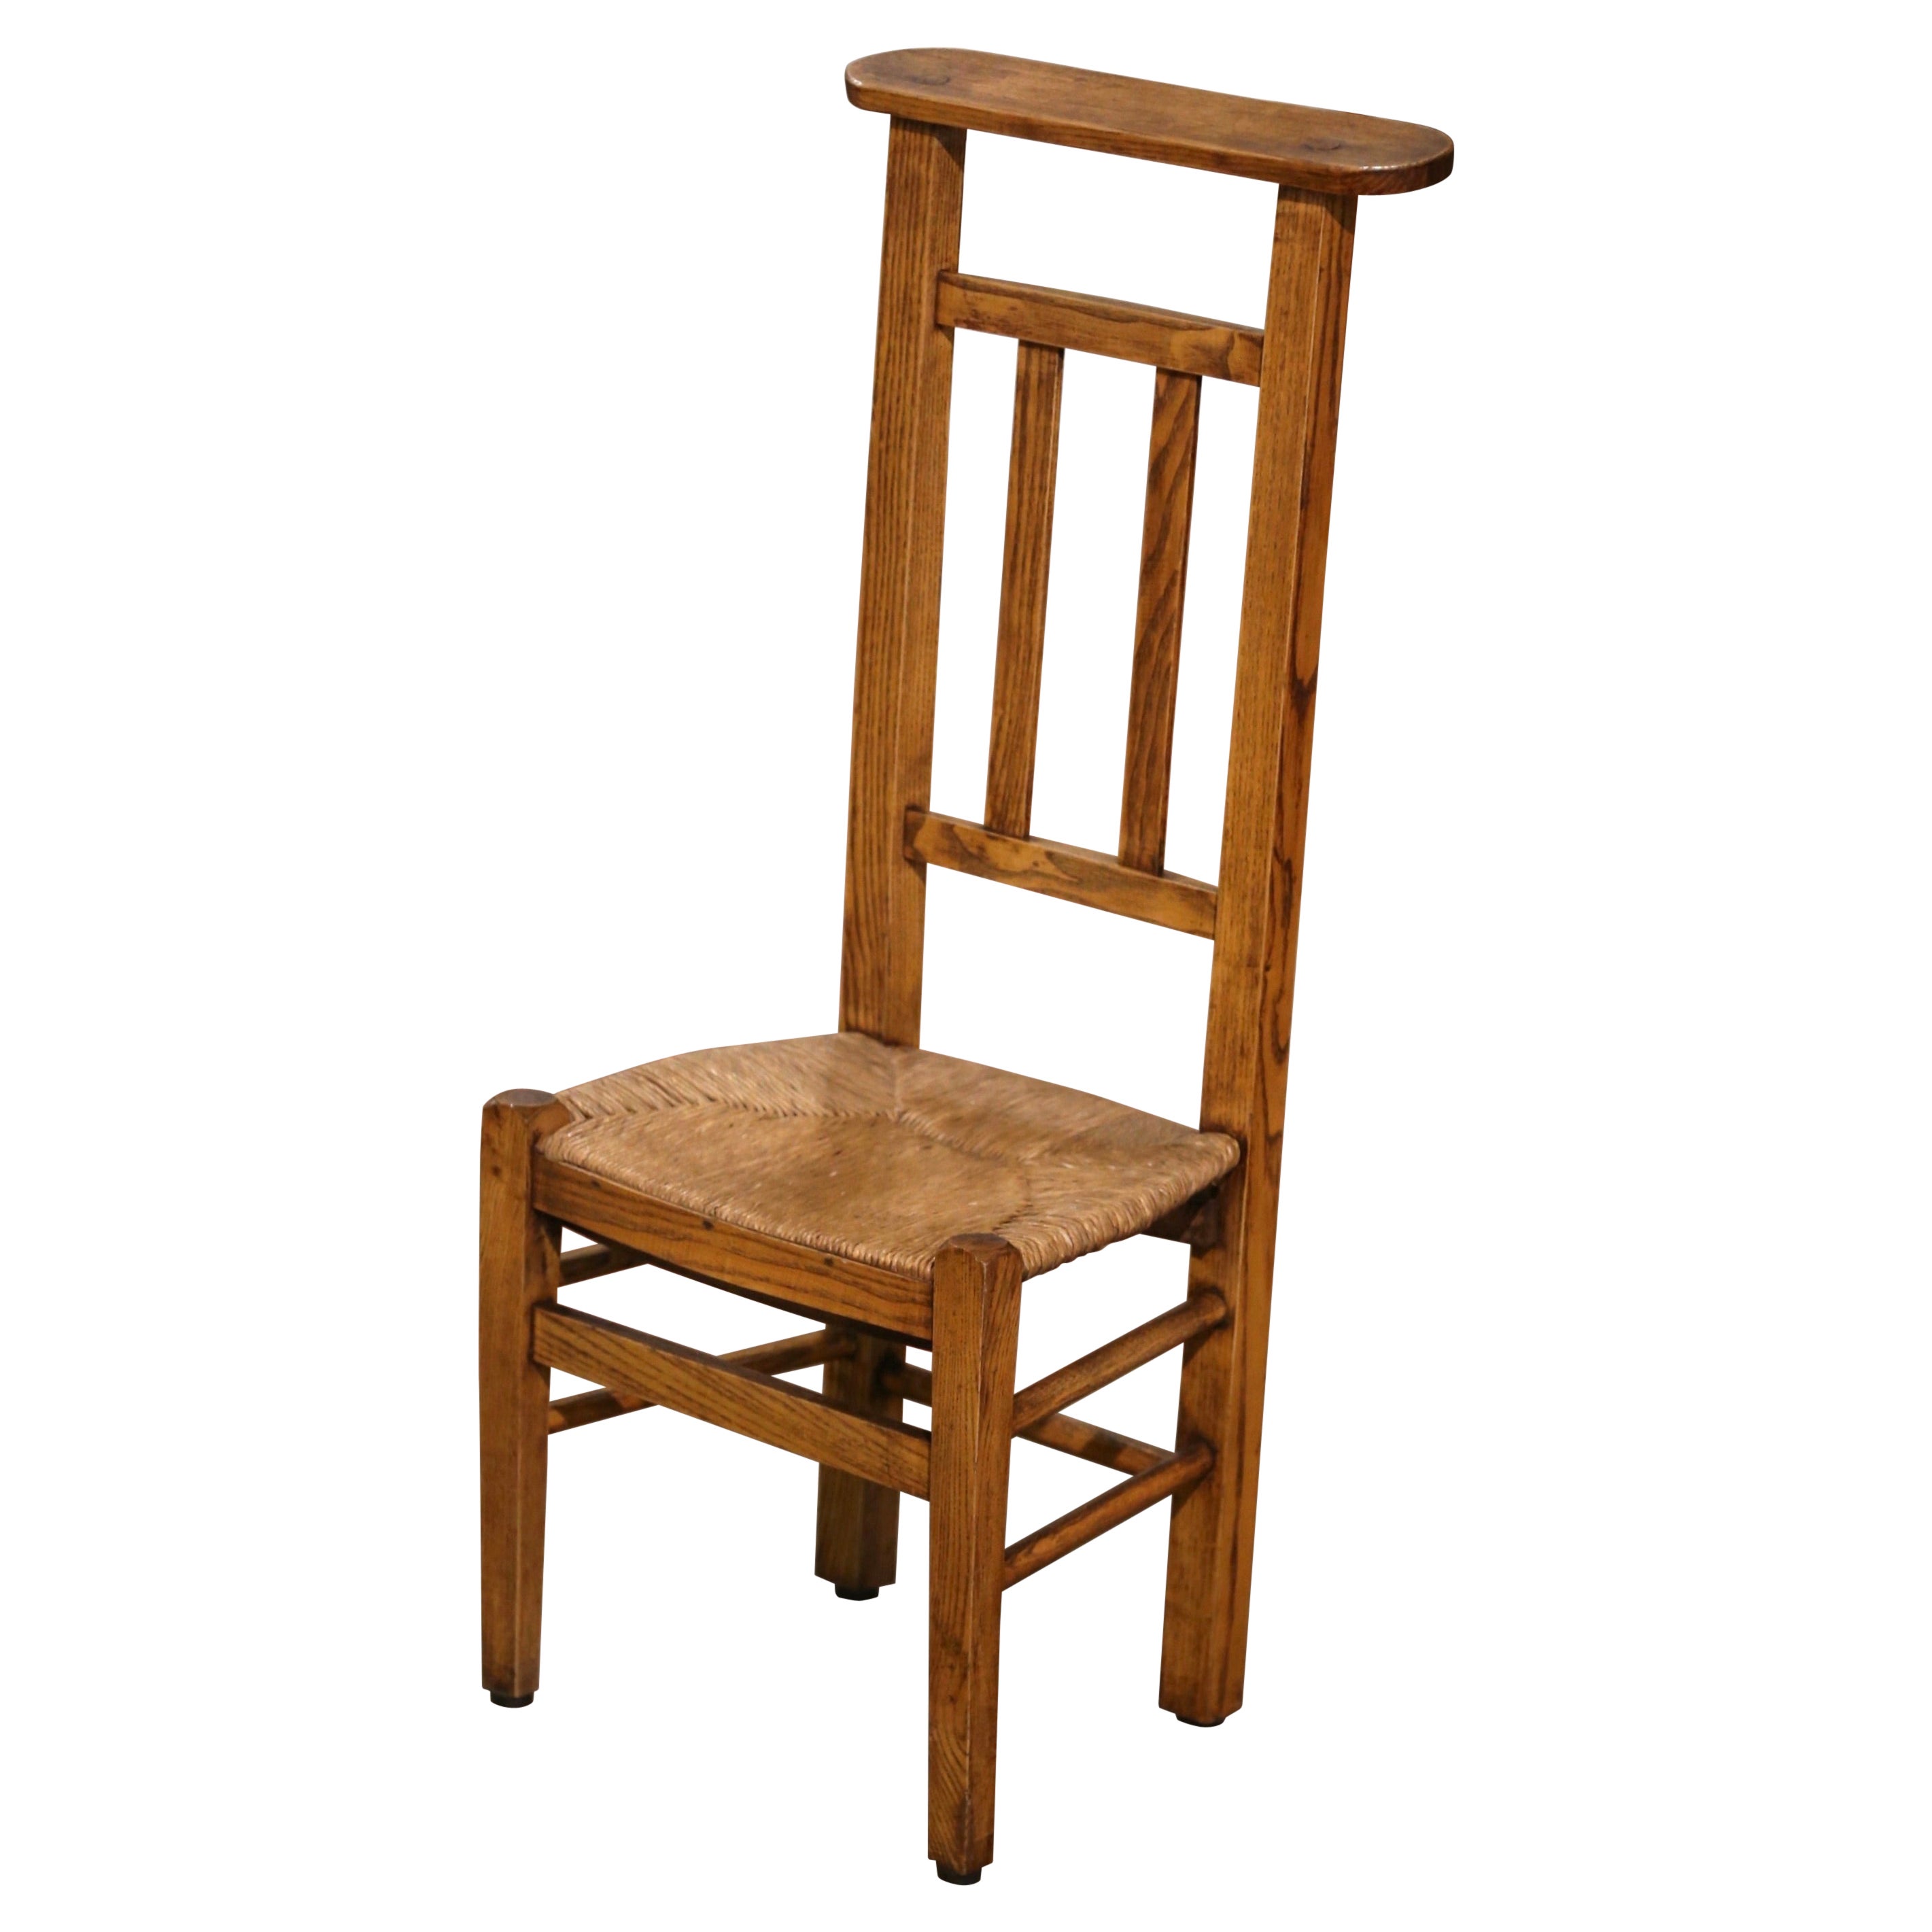 What is a prayer chair?